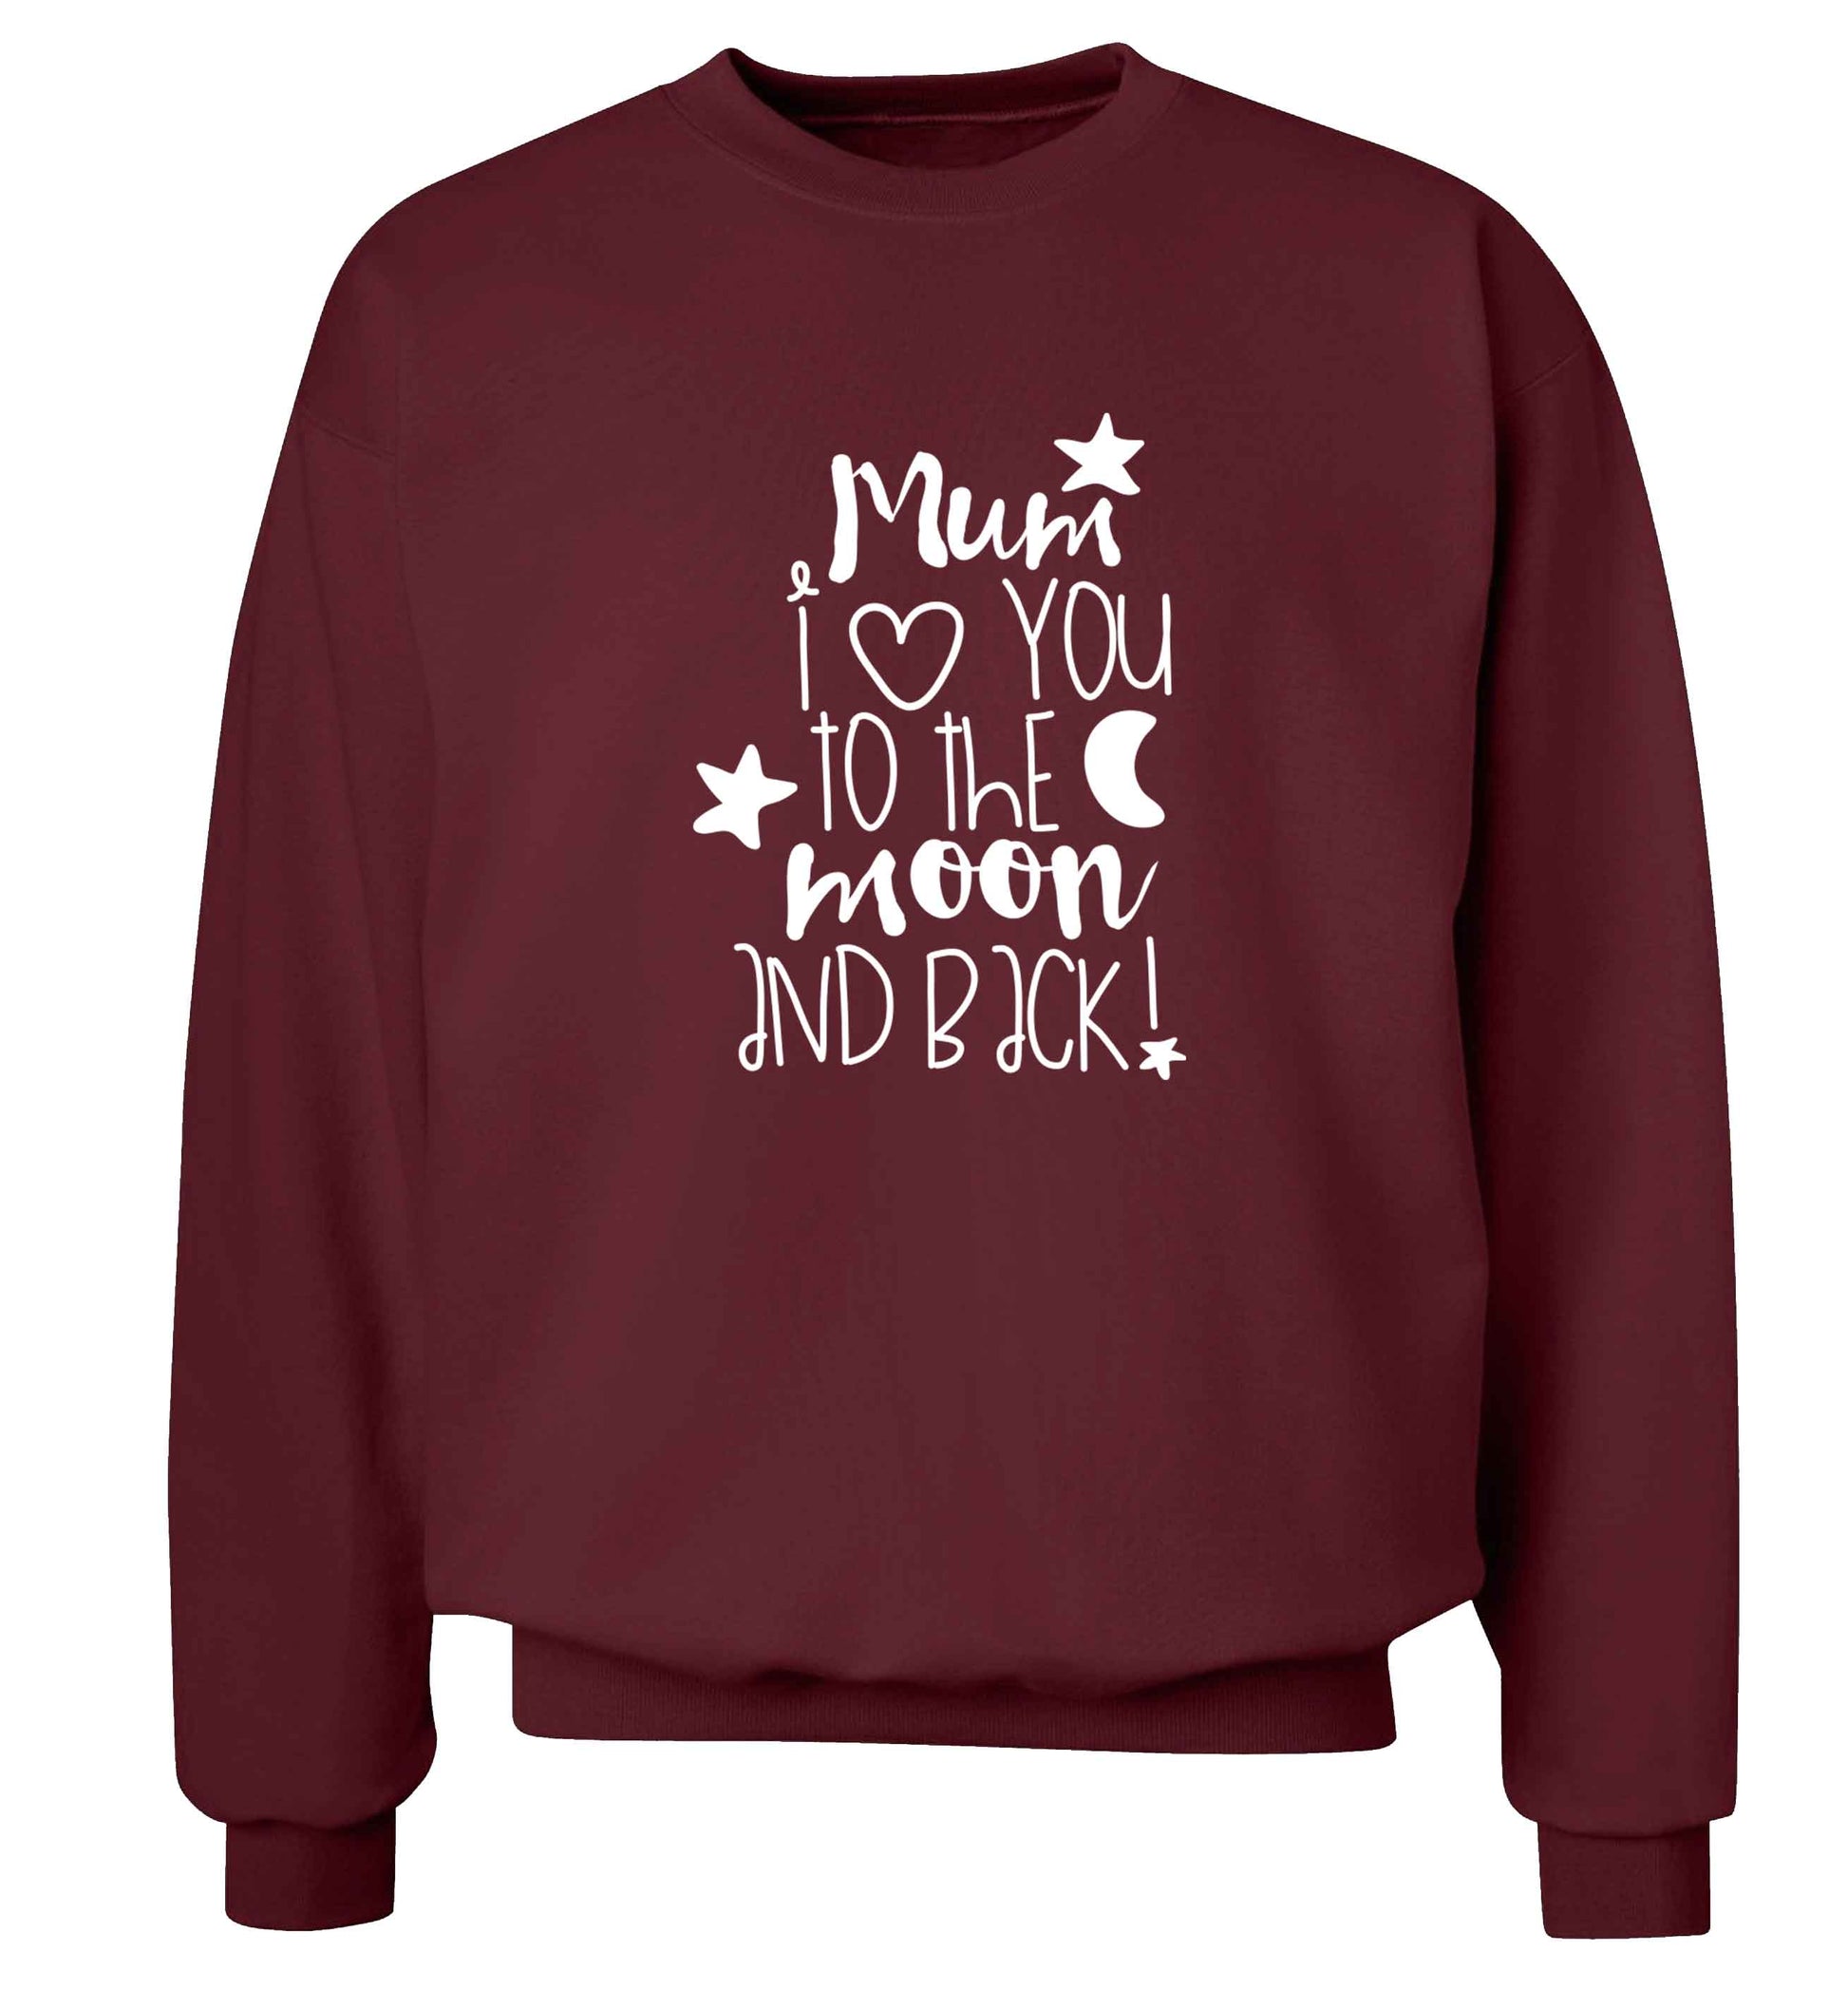 Mum I love you to the moon and back adult's unisex maroon sweater 2XL